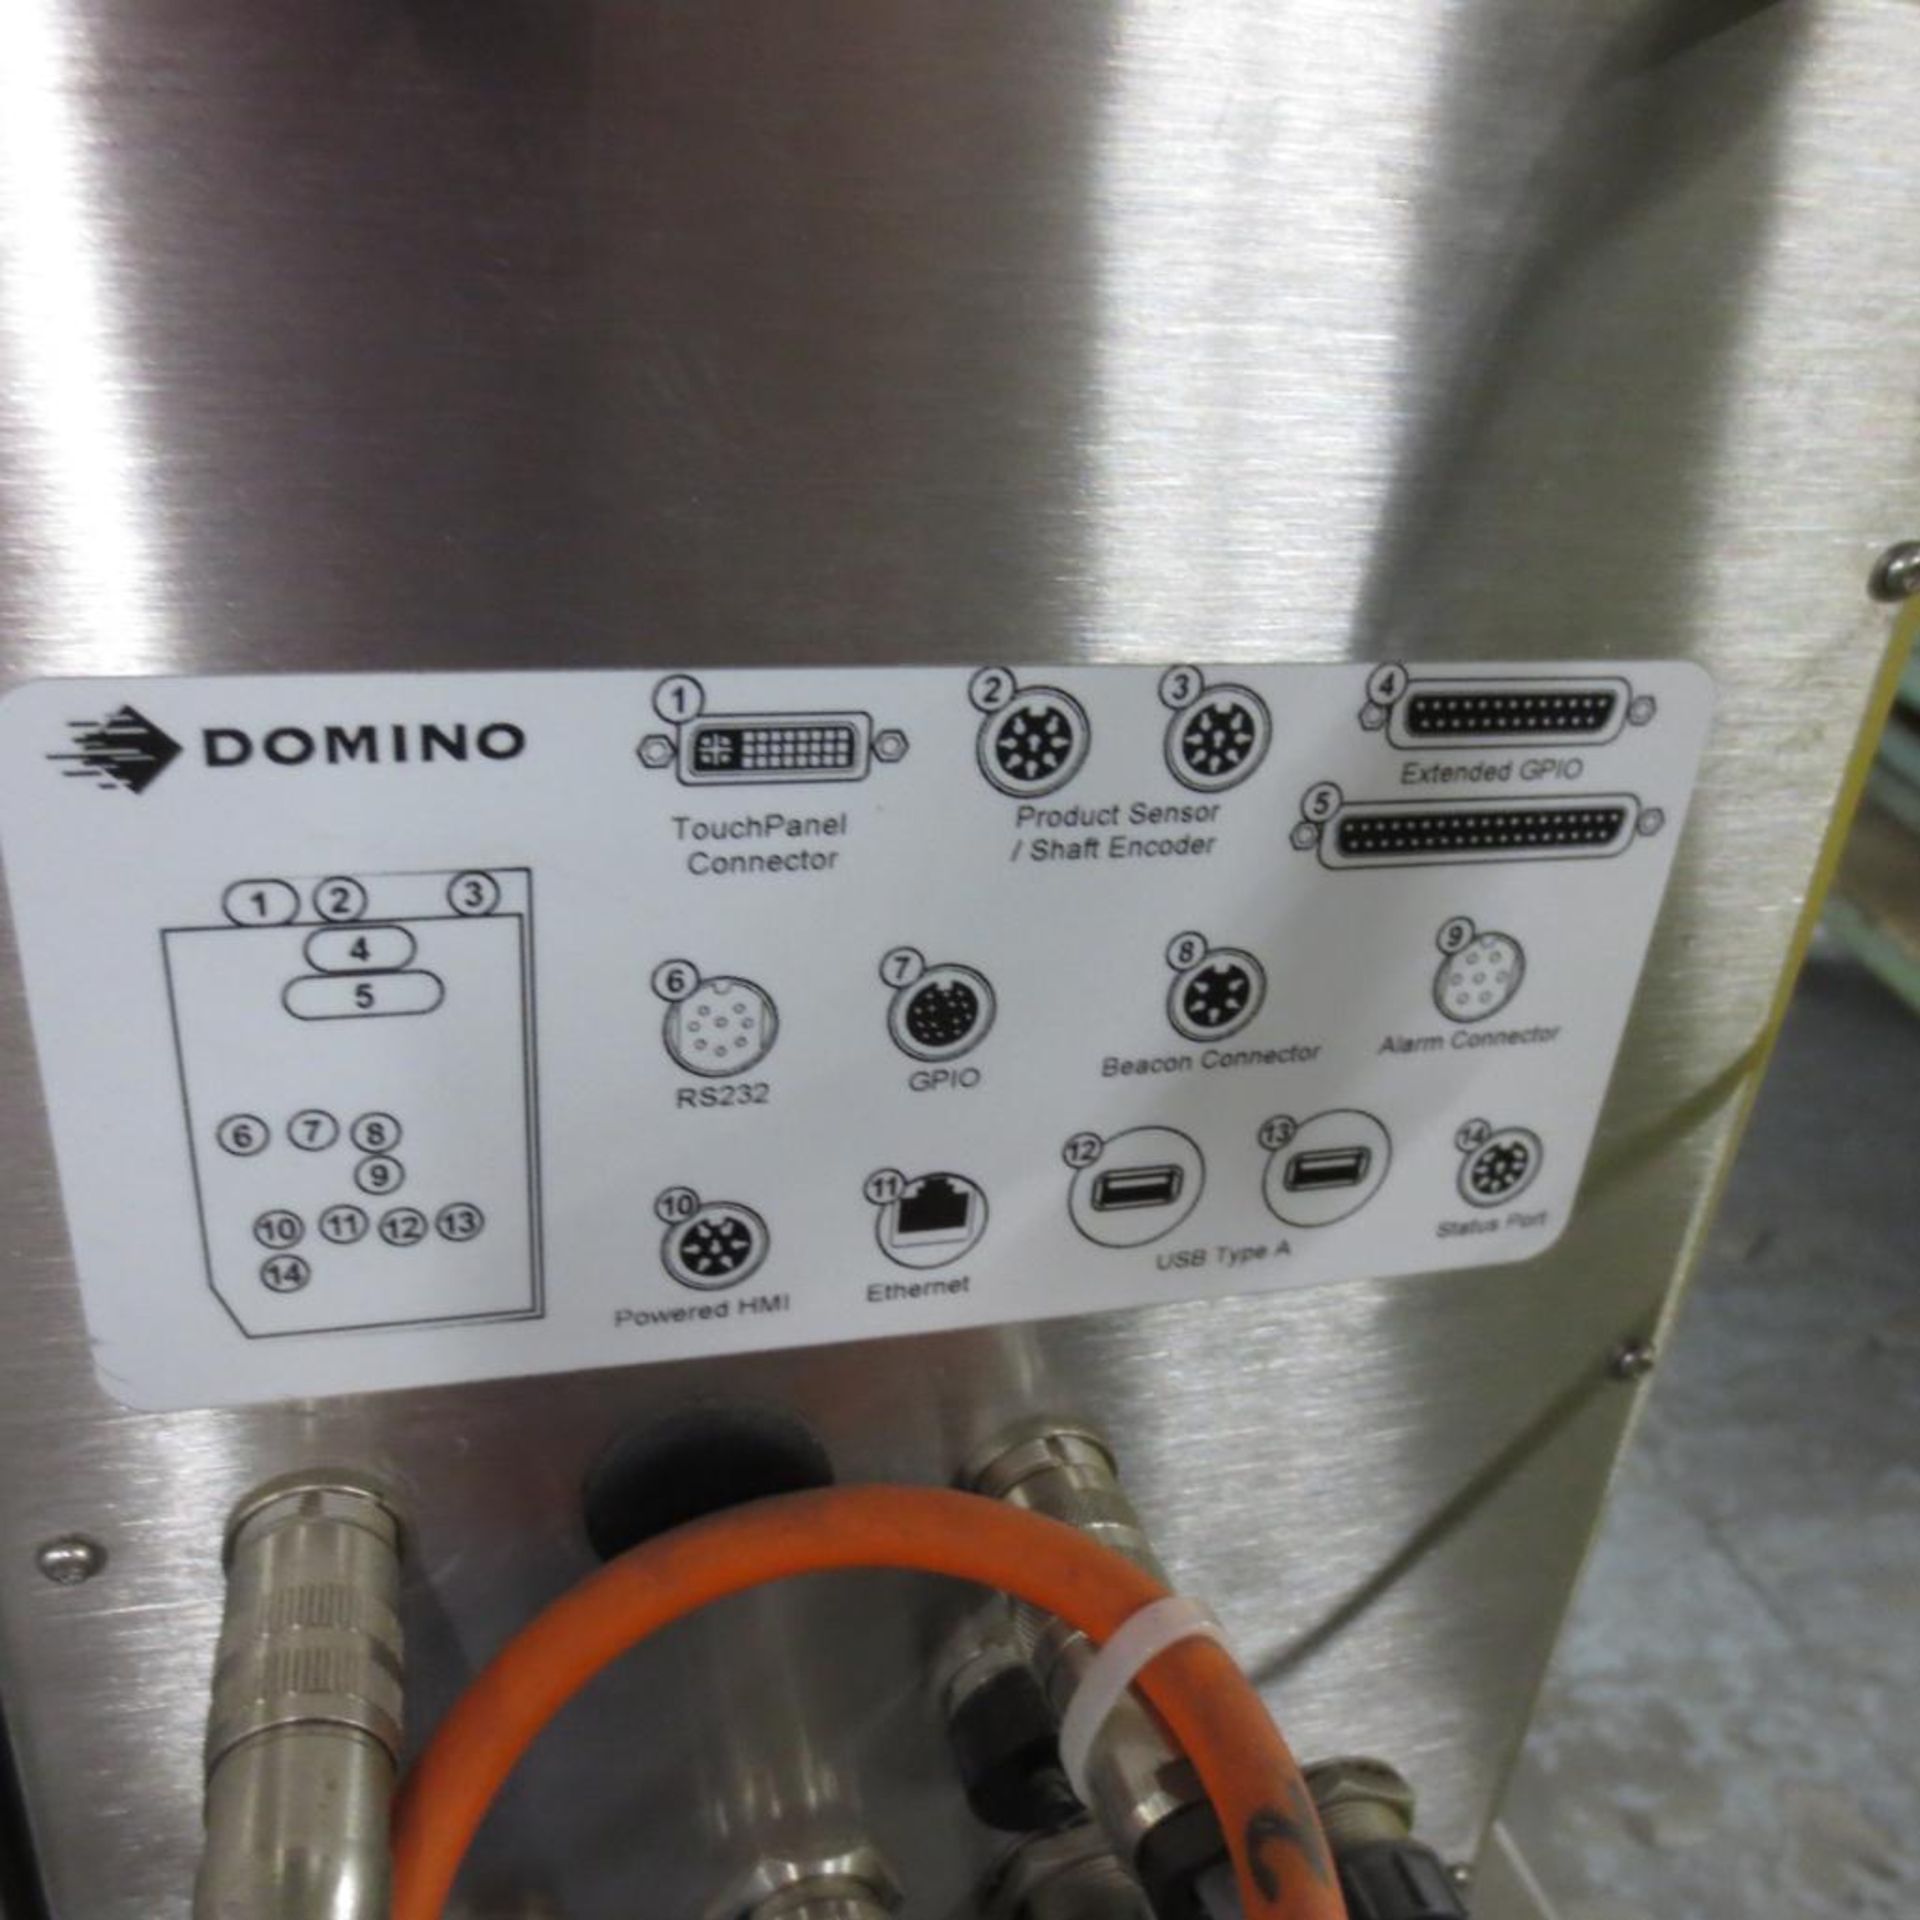 (4) Domino Model Ax350i Marking Machines ***PARTS MACHINES, NOT OPERABLE*** - Image 4 of 5